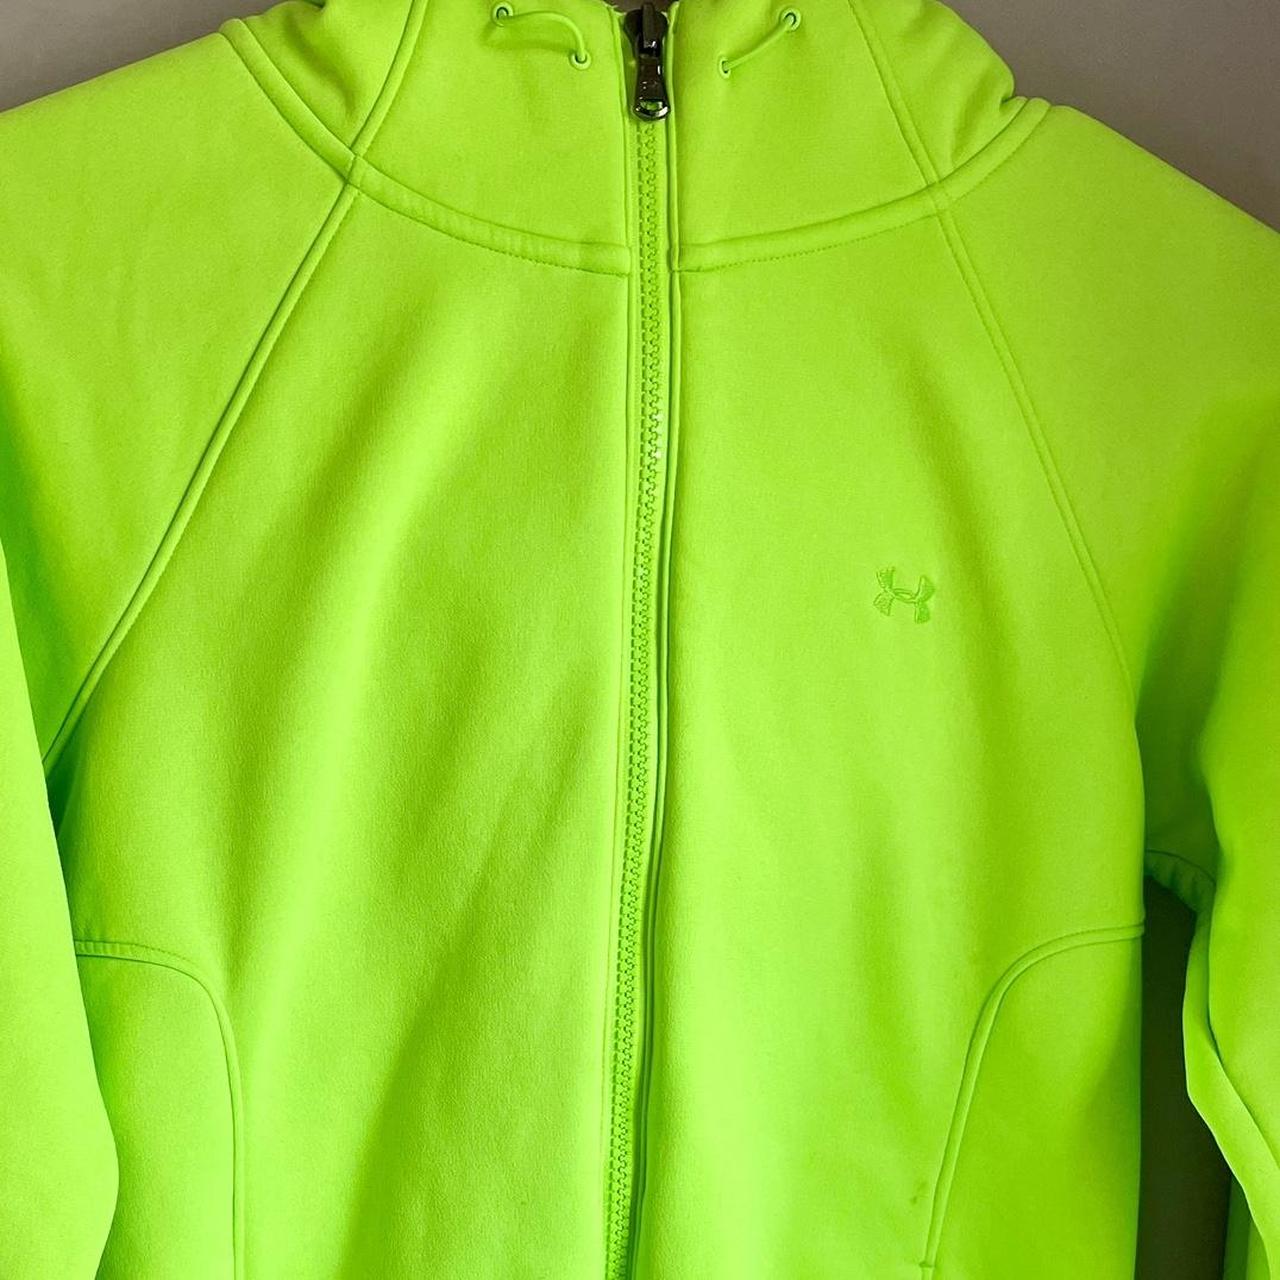 Neon Lime Green Under Armour jacket💚 very... - Depop